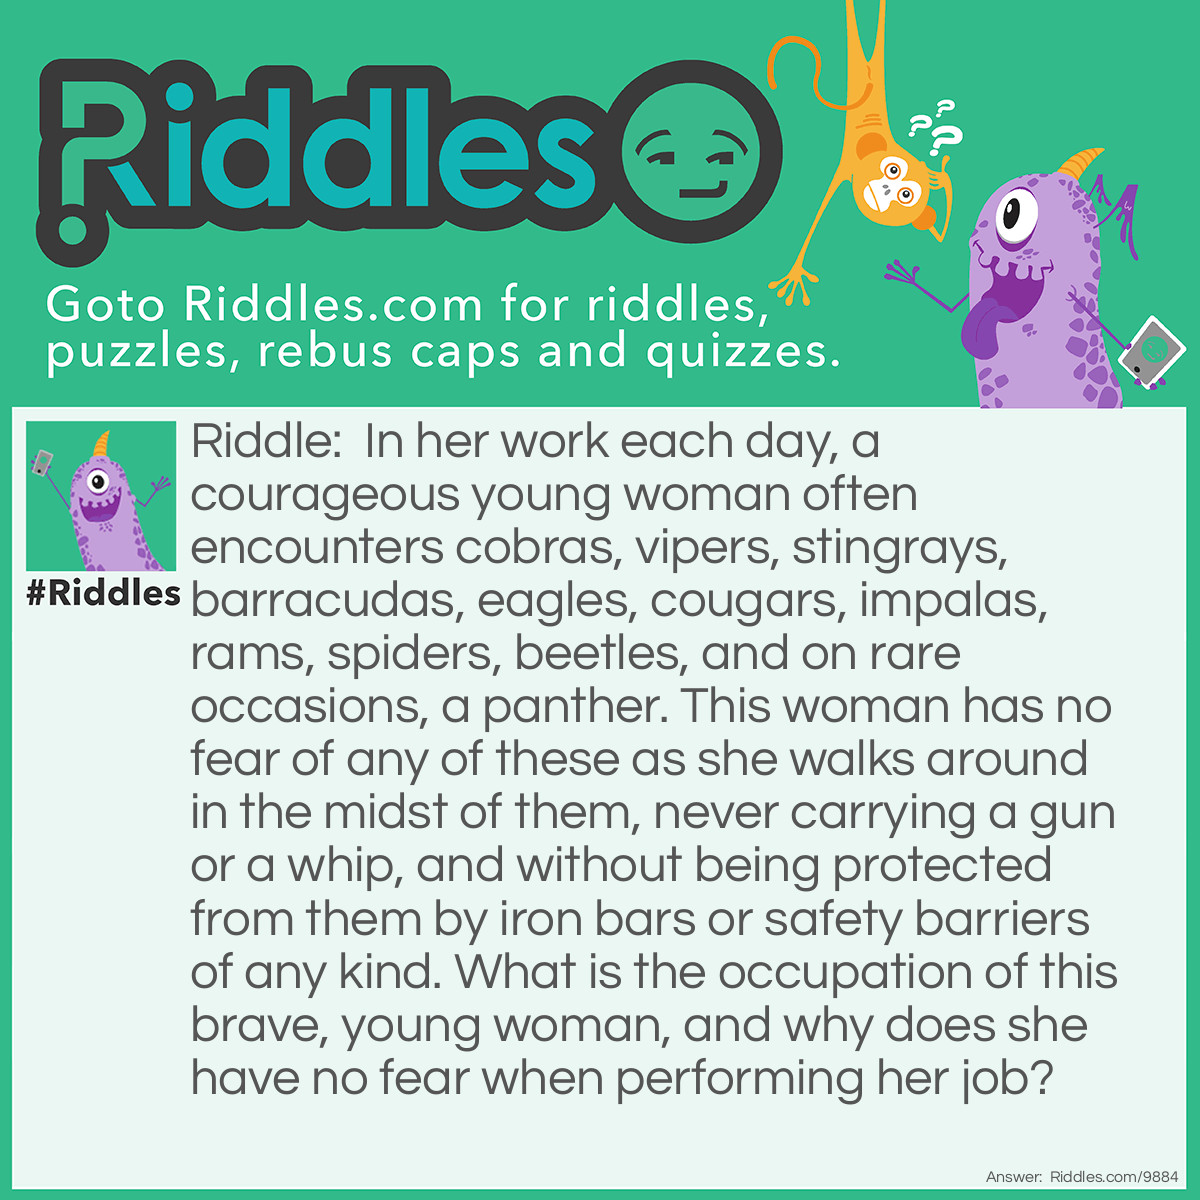 Riddle: In her work each day, a courageous young woman often encounters cobras, vipers, stingrays, barracudas, eagles, cougars, impalas, rams, spiders, beetles, and on rare occasions, a panther. This woman has no fear of any of these as she walks around in the midst of them, never carrying a gun or a whip, and without being protected from them by iron bars or safety barriers of any kind. What is the occupation of this brave, young woman, and why does she have no fear when performing her job? Answer: The young woman is a used-car saleswoman who encounters a wide variety of high and low end trade-ins at the dealership where she works. Incidentally, all of the models of the used cars listed in this puzzle are named after animals. The last one mentioned, the Watercar panther, is an amphibious automobile which started to be produced in 2013.